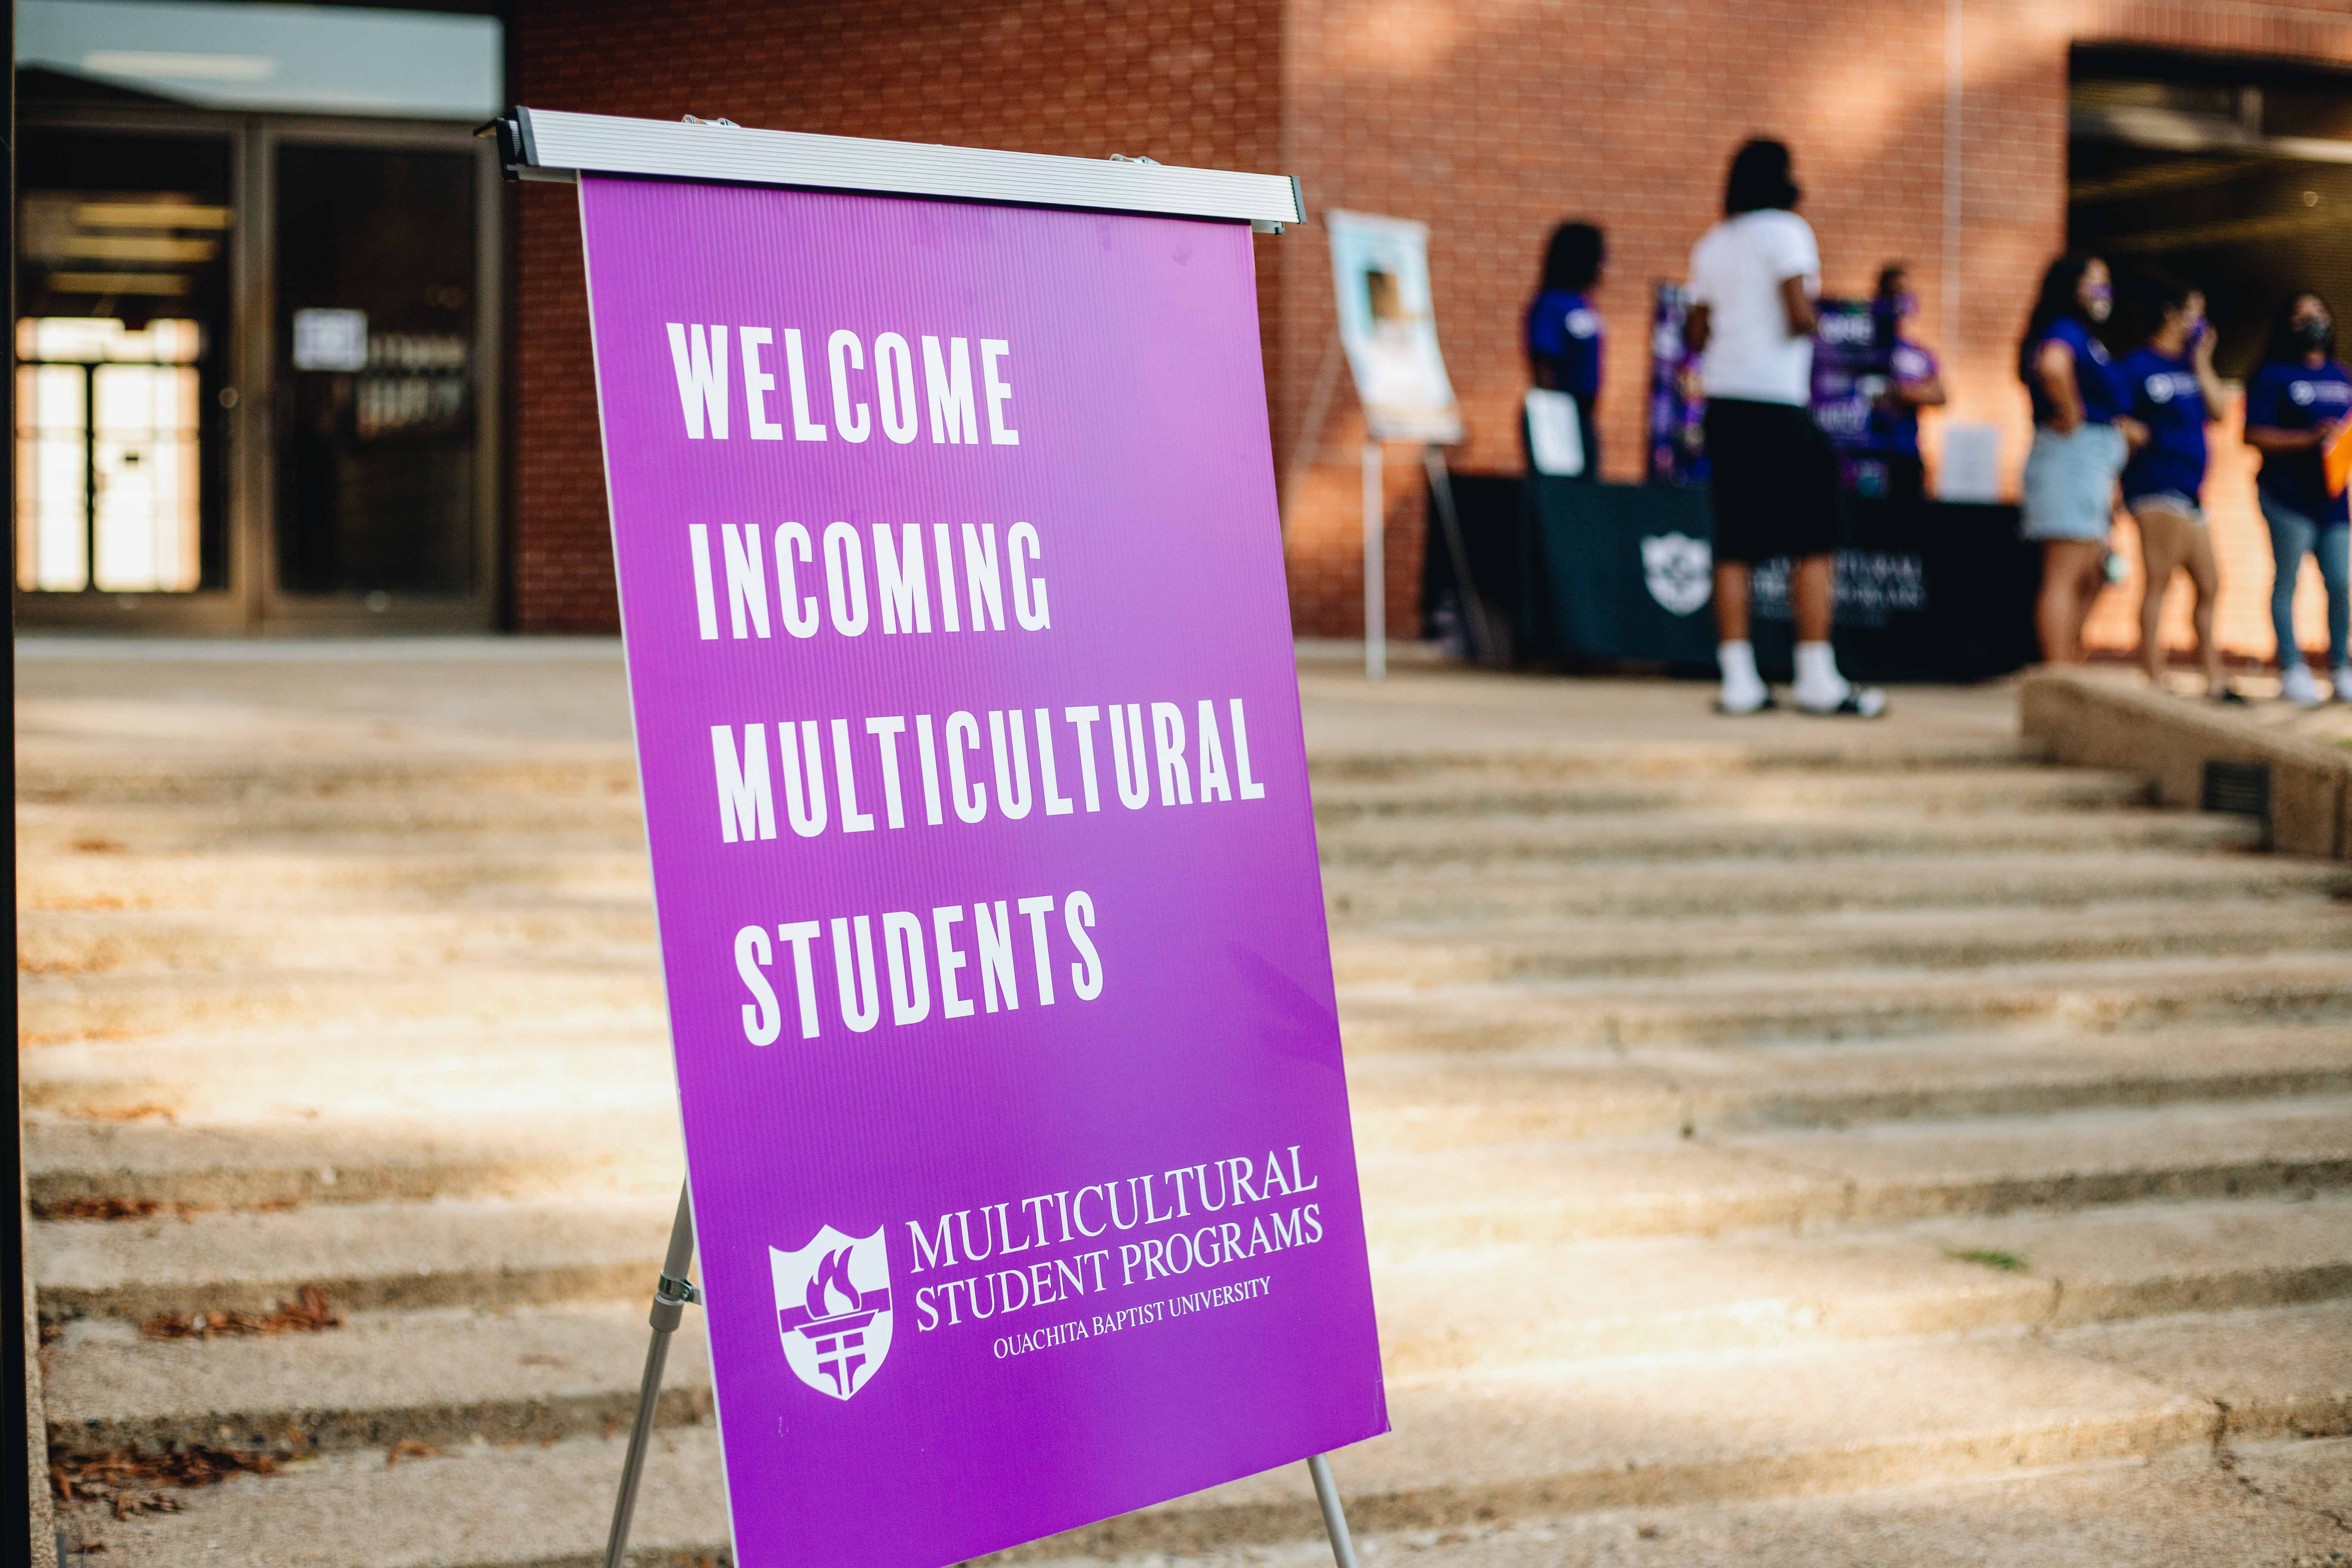 Multicultural Student Programs